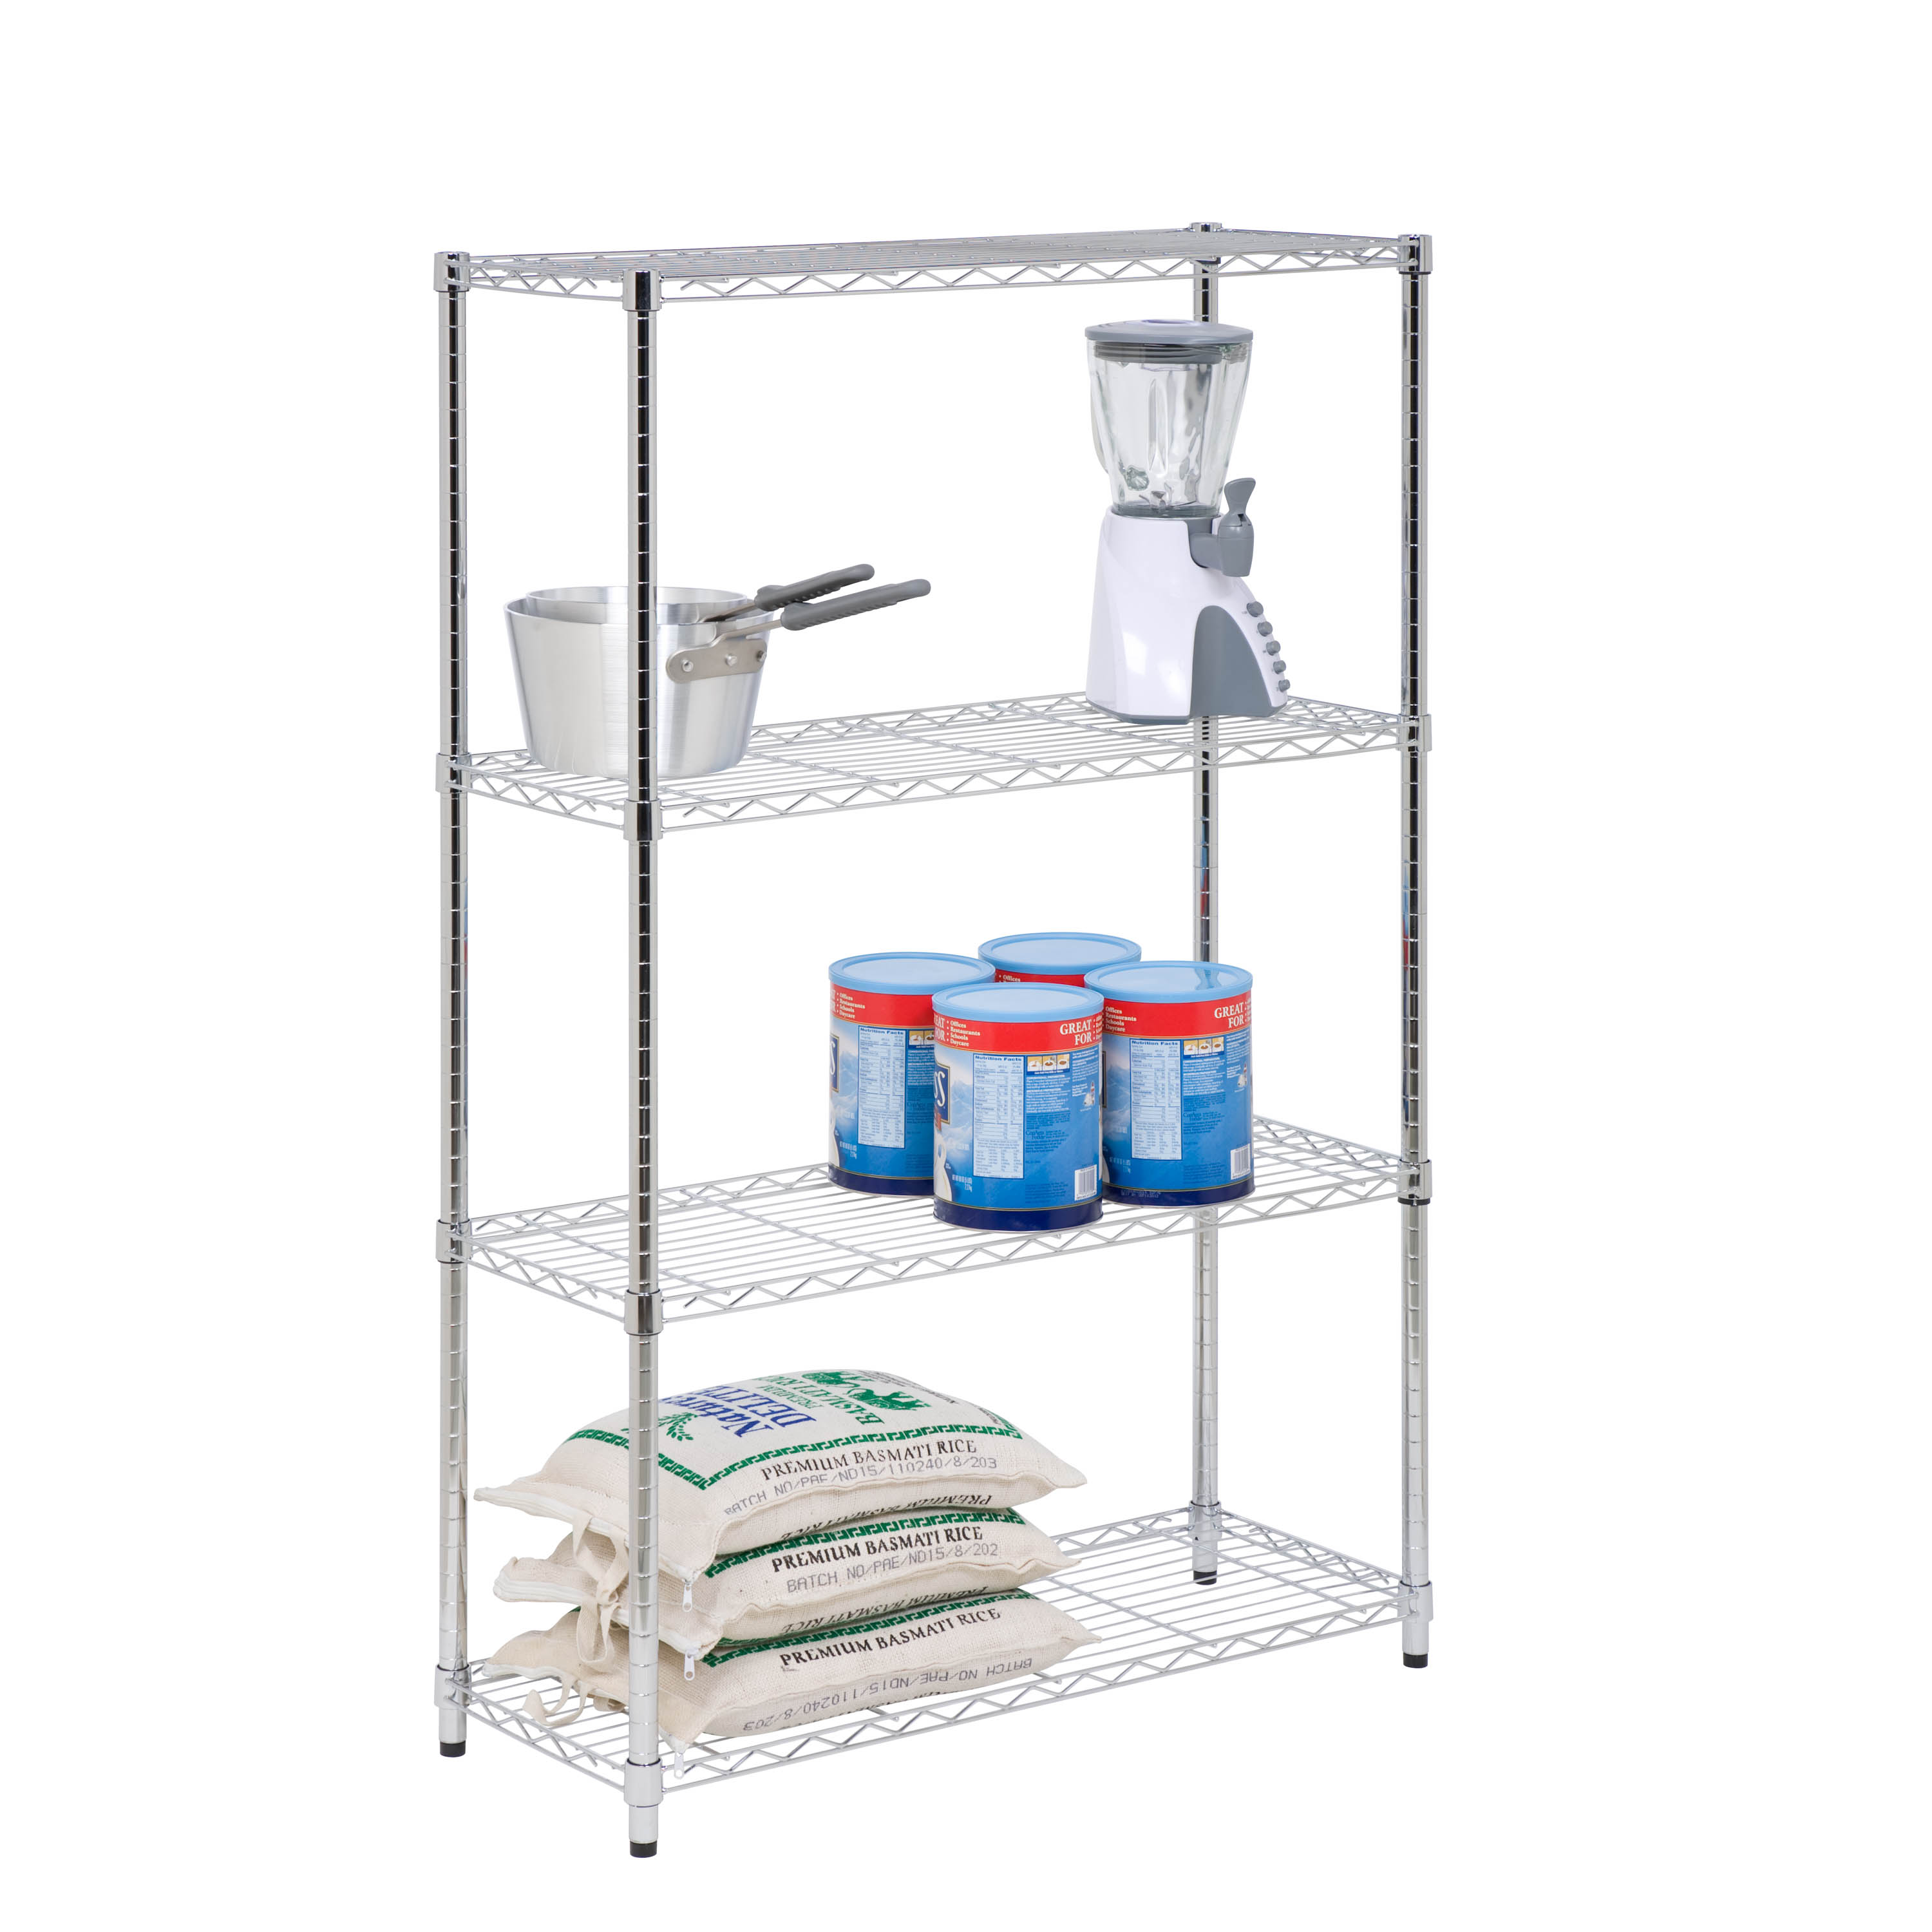 Honey Can Do 4-Tier Heavy-Duty Adjustable Shelving Unit With 250-Lb Weight Capacity, Chrome, Basement/Garage - image 2 of 5